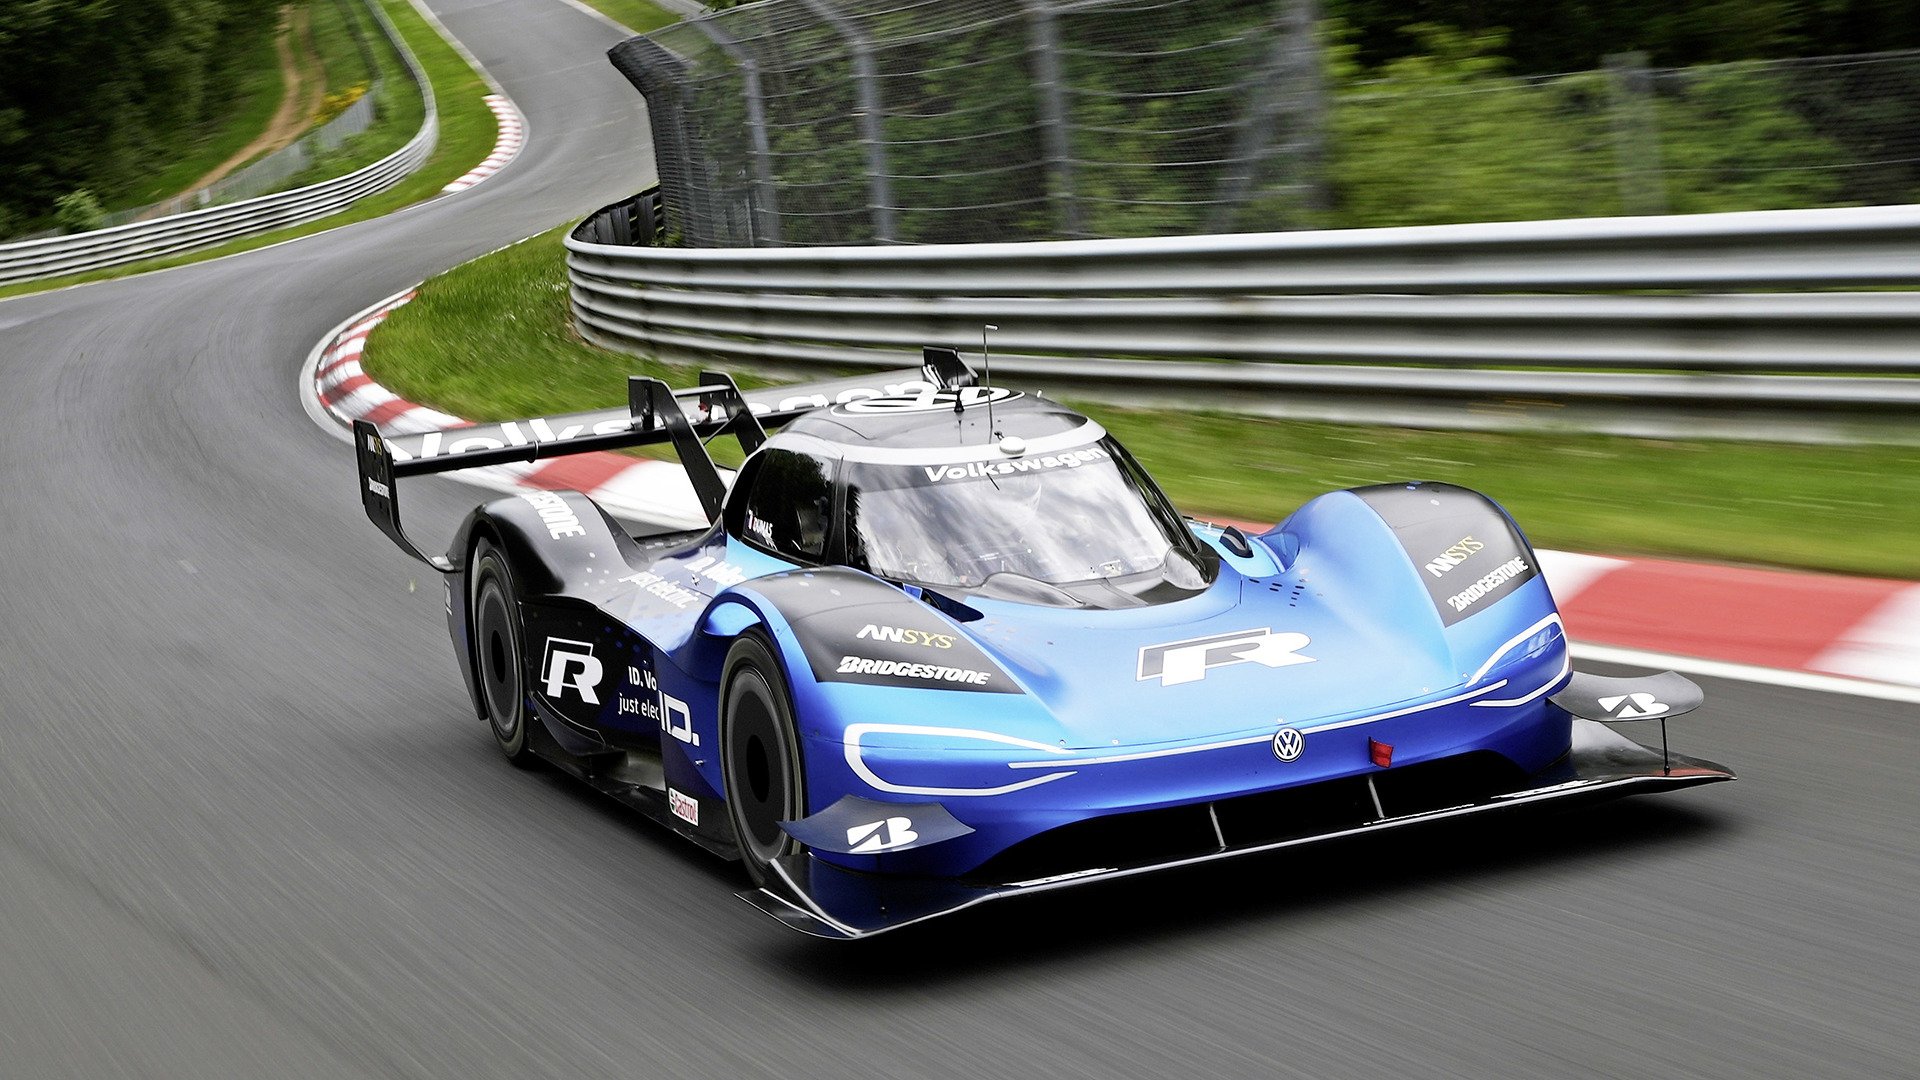 Gran Turismo 7 Release Date is March 4 2022 – GTPlanet